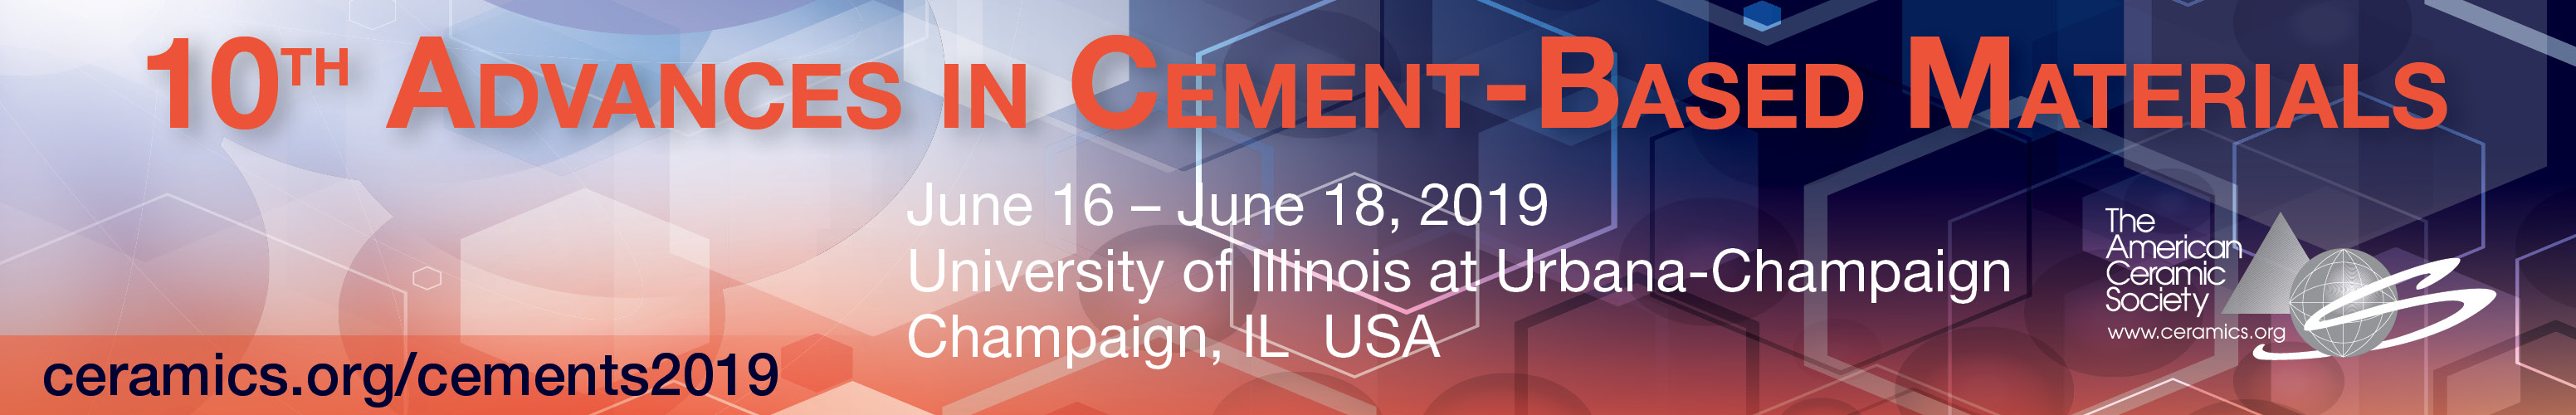 10th Advances in Cement-Based Materials archive | The American Ceramic